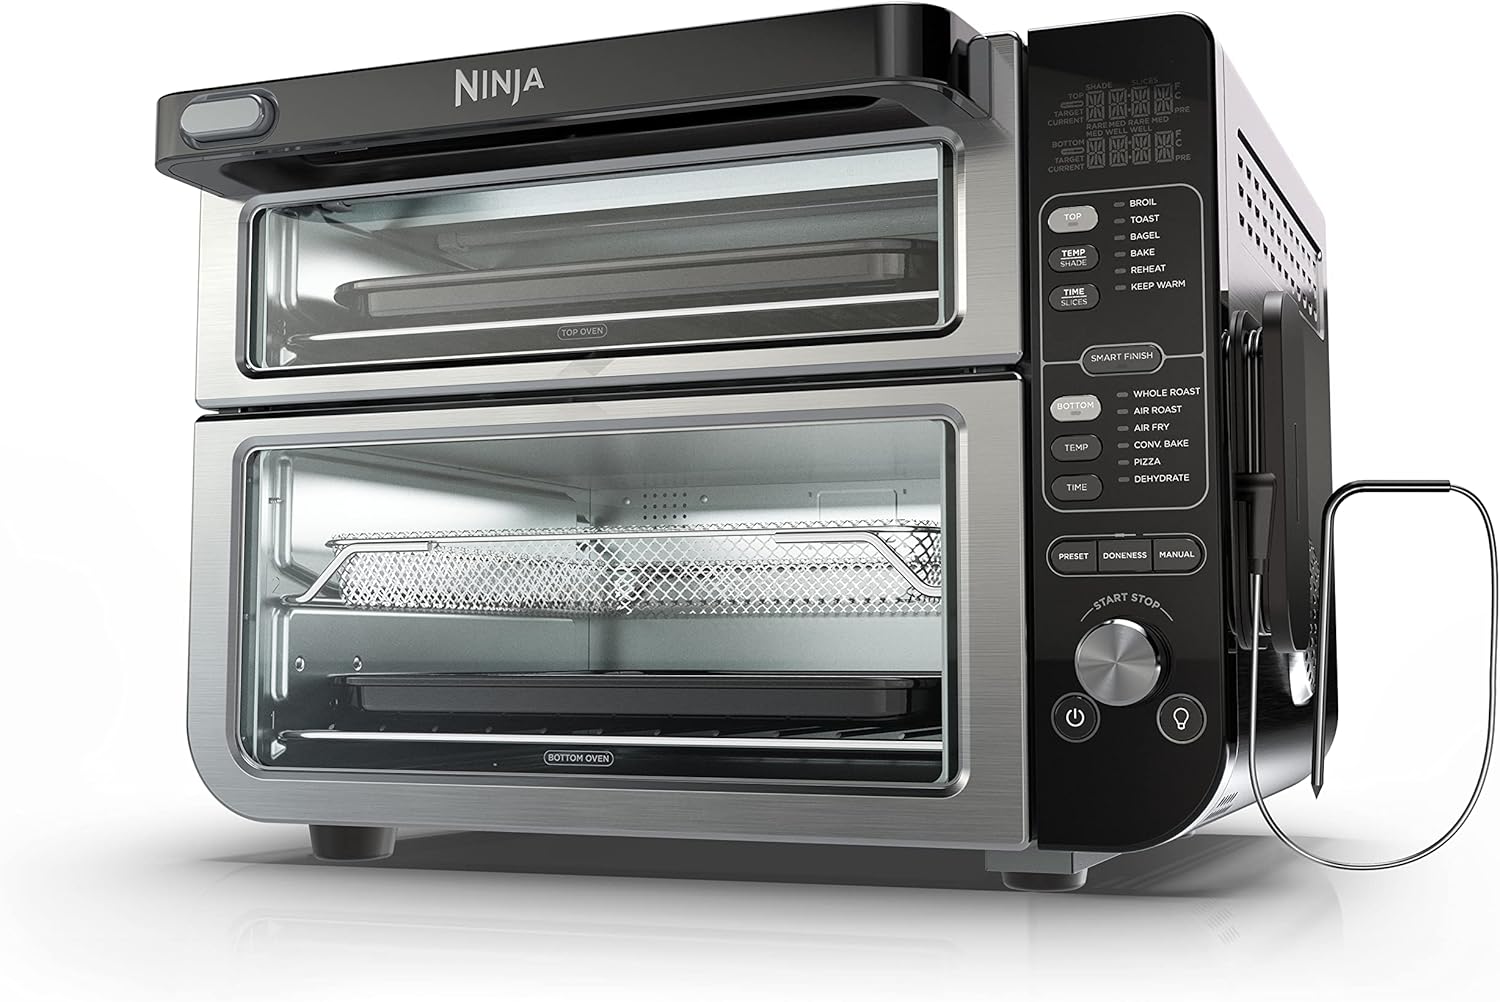 Ninja 12-in-1 Smart FlexDoor with Thermometer, Convection + Air Fry Double Oven, Stainless Steel - Certified Refurbished